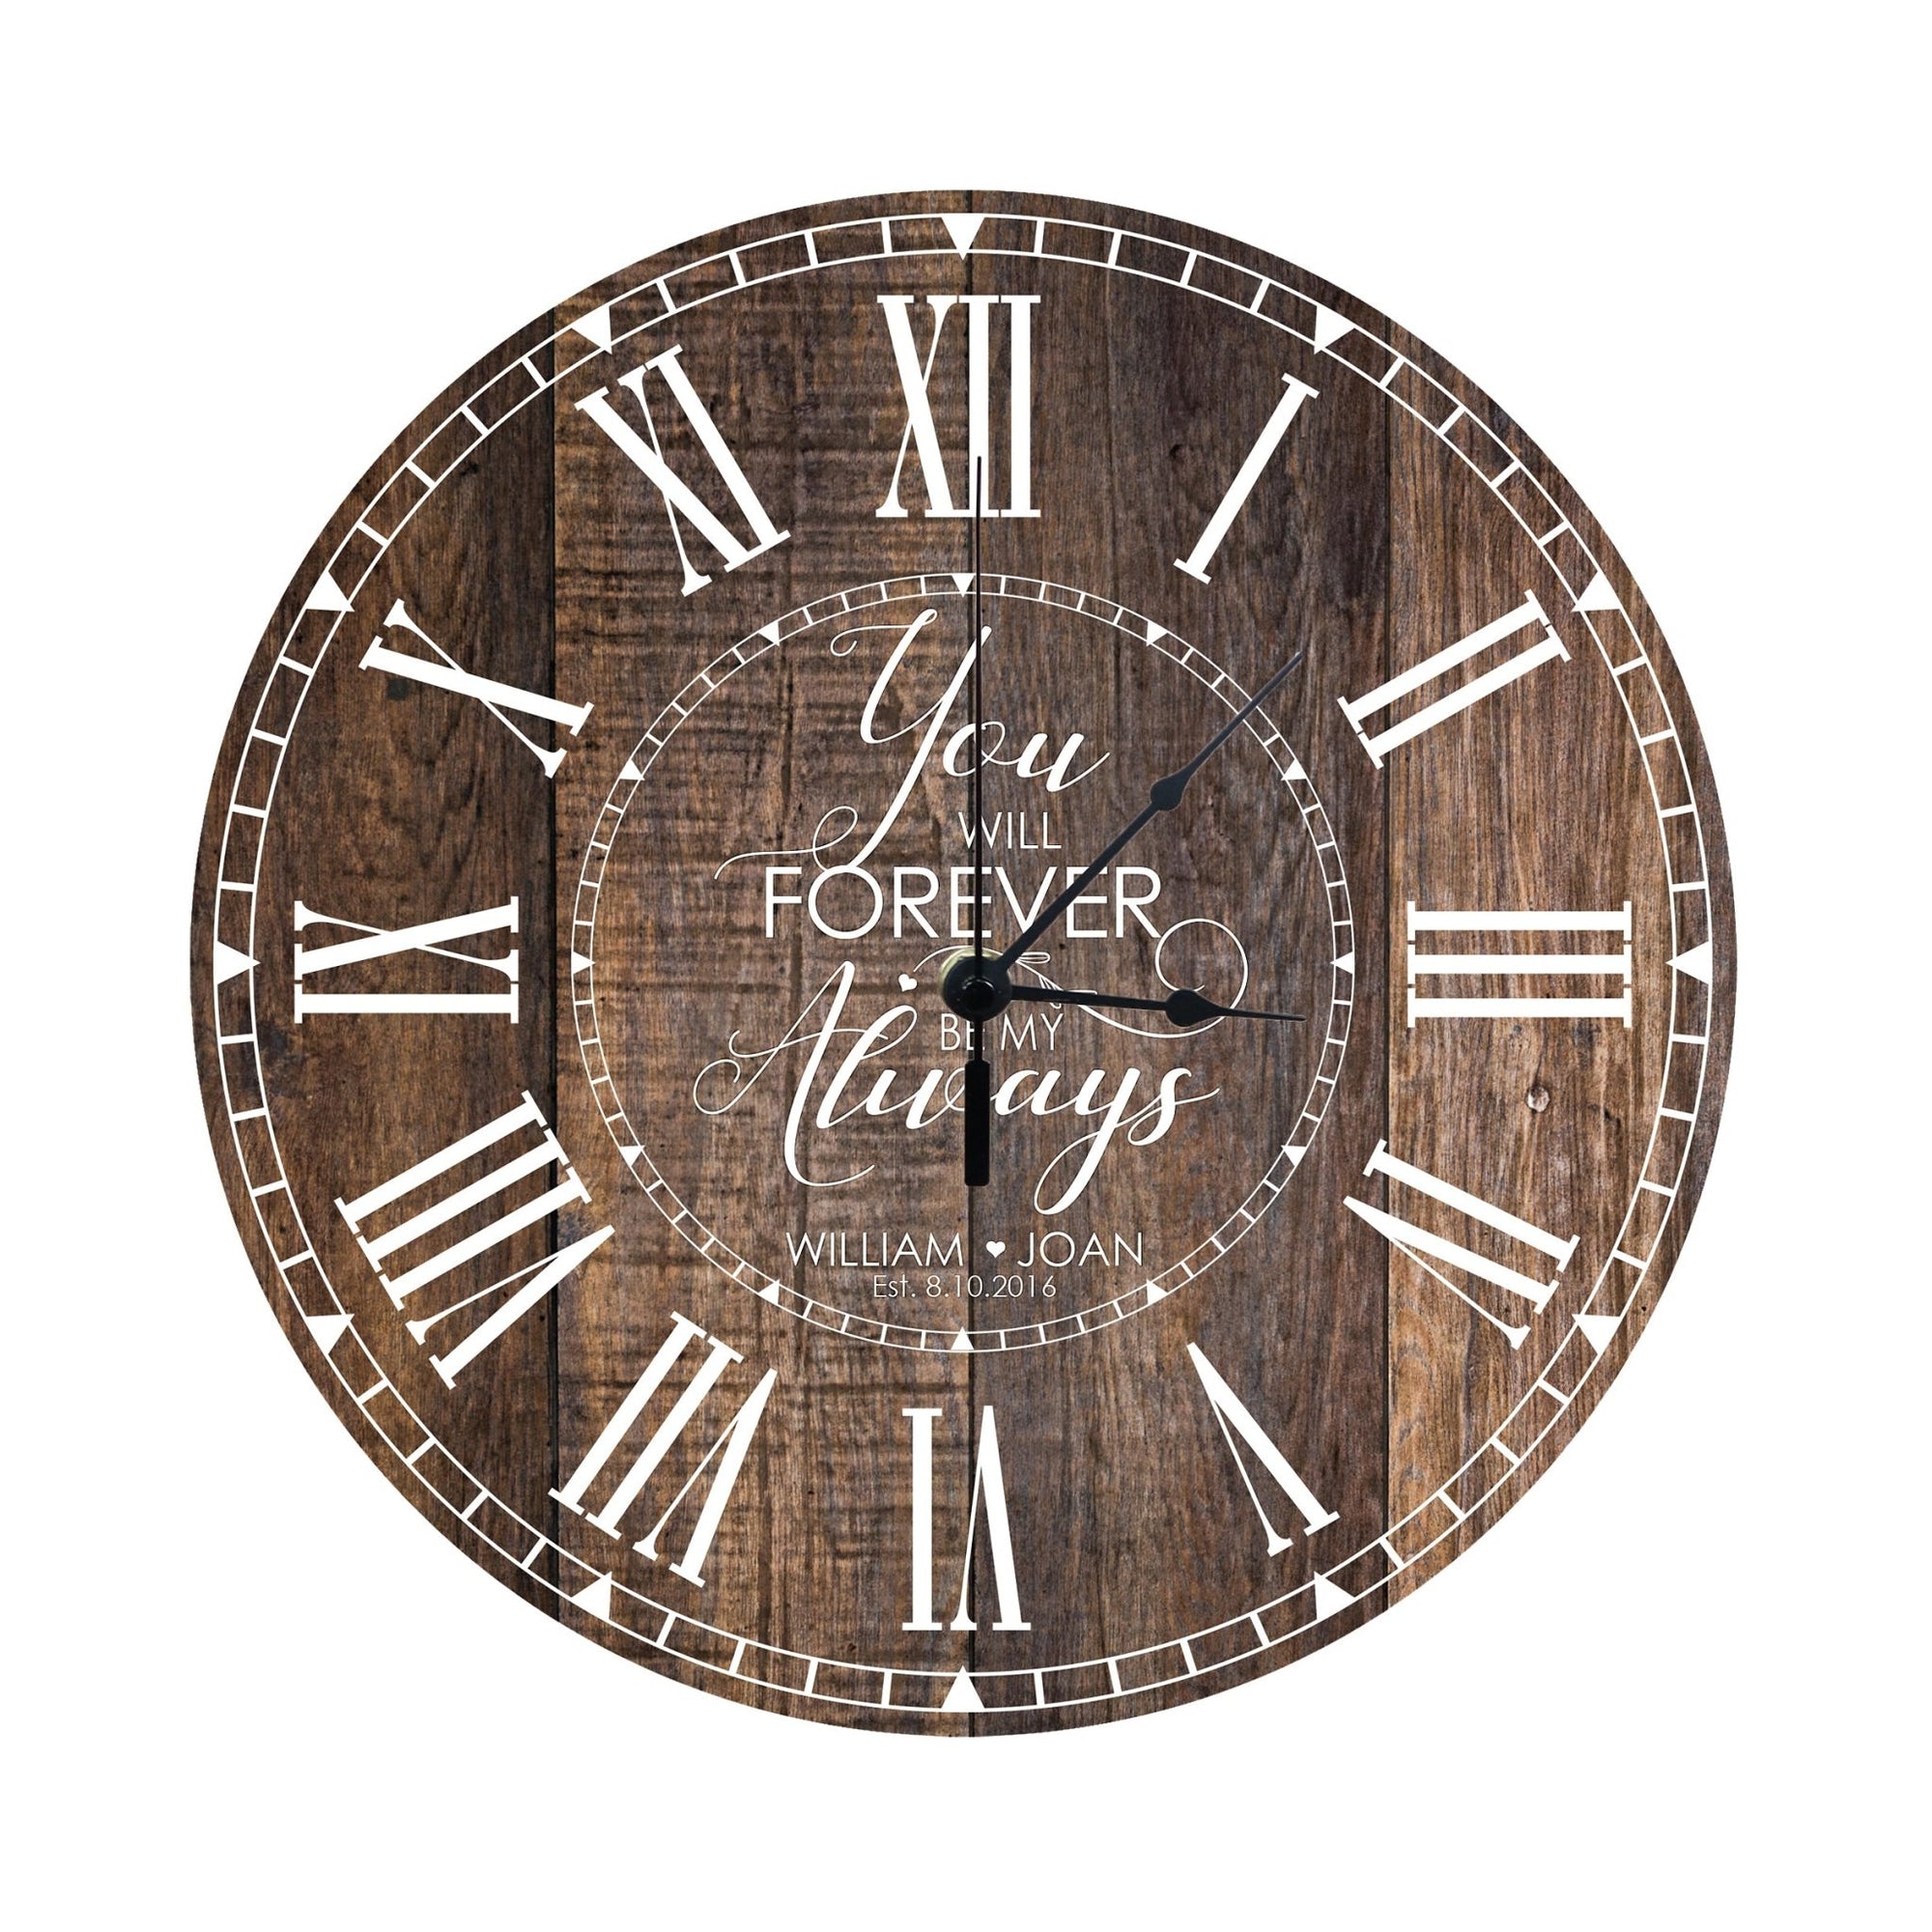 Personalized Inspirational Everyday Home and Family Wall Clock 12 x 12 x 0.125-(You will forever) - LifeSong Milestones